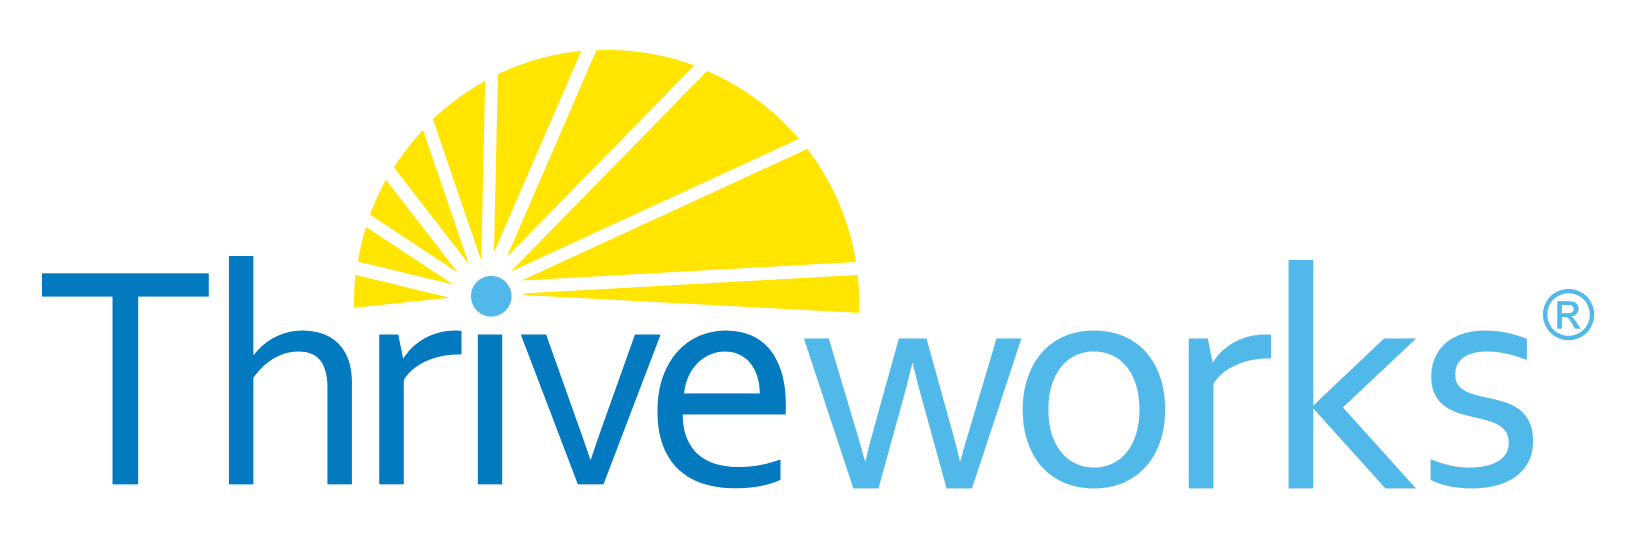 A blue and yellow logo for livework